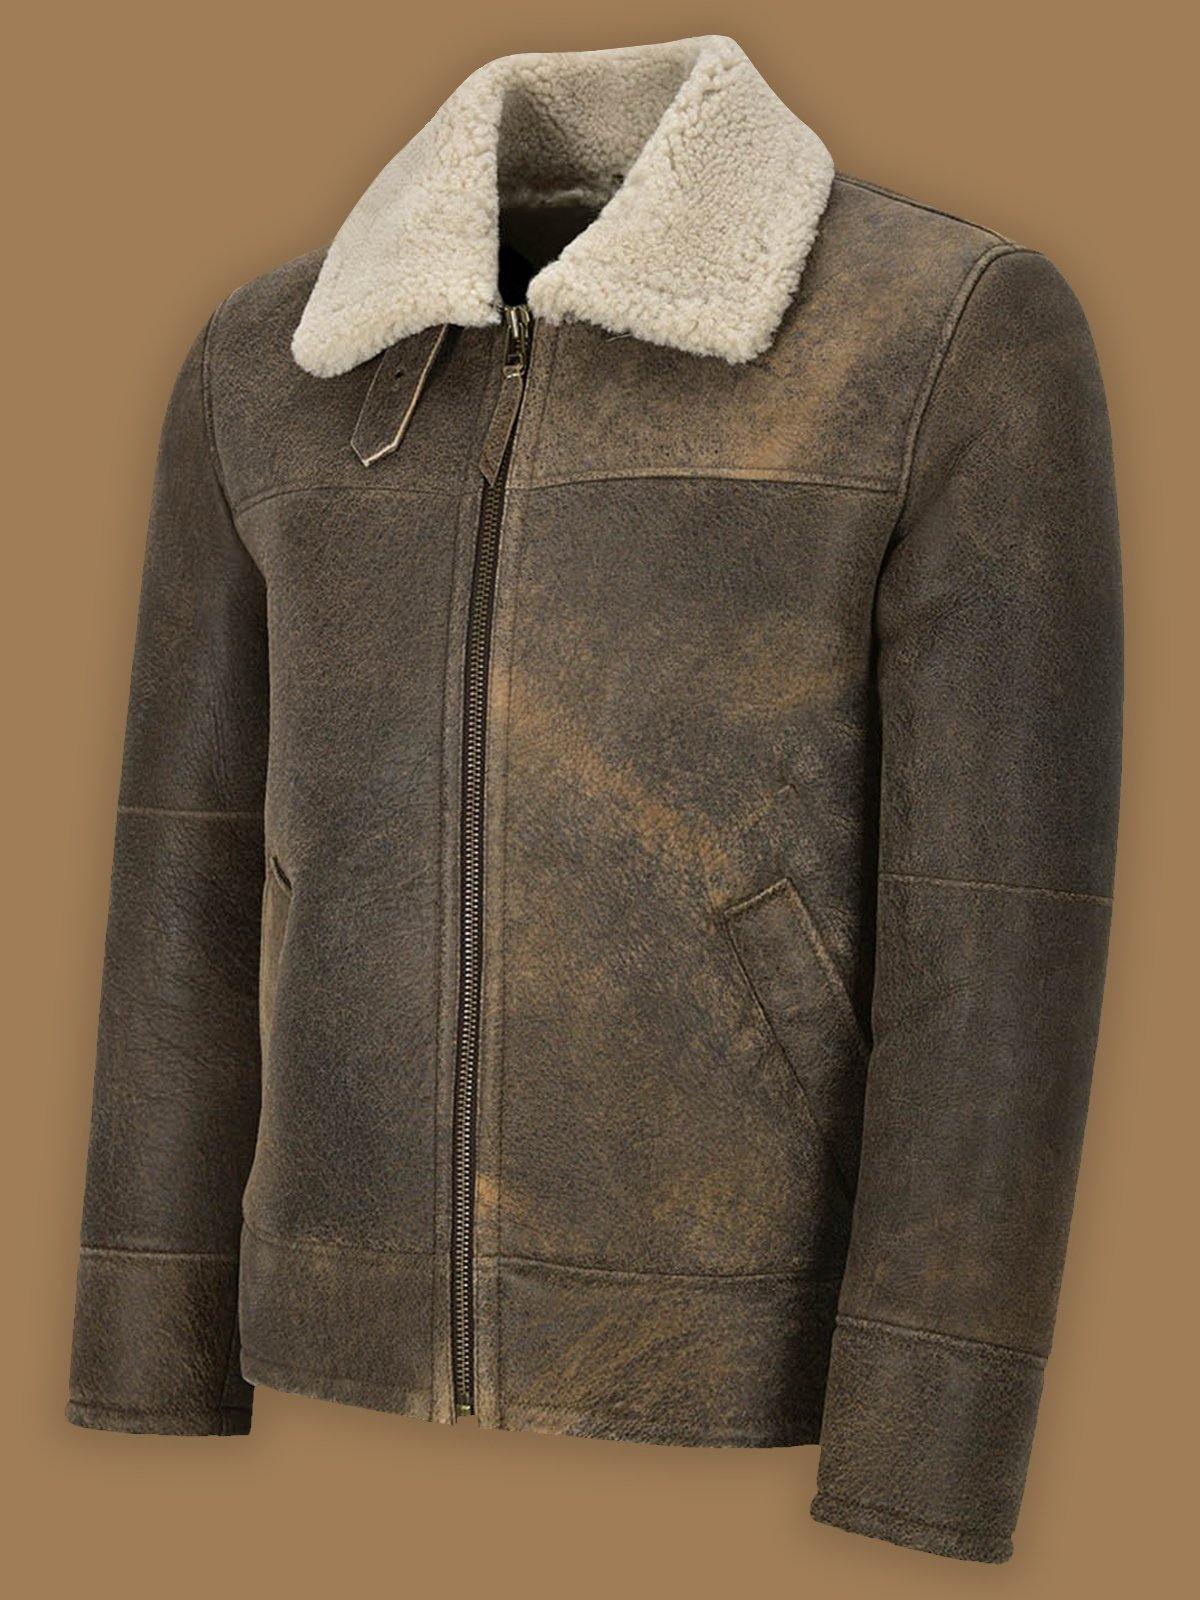 MEN OLD FASHION BROWN SHEARLING JACKET - Wiseleather